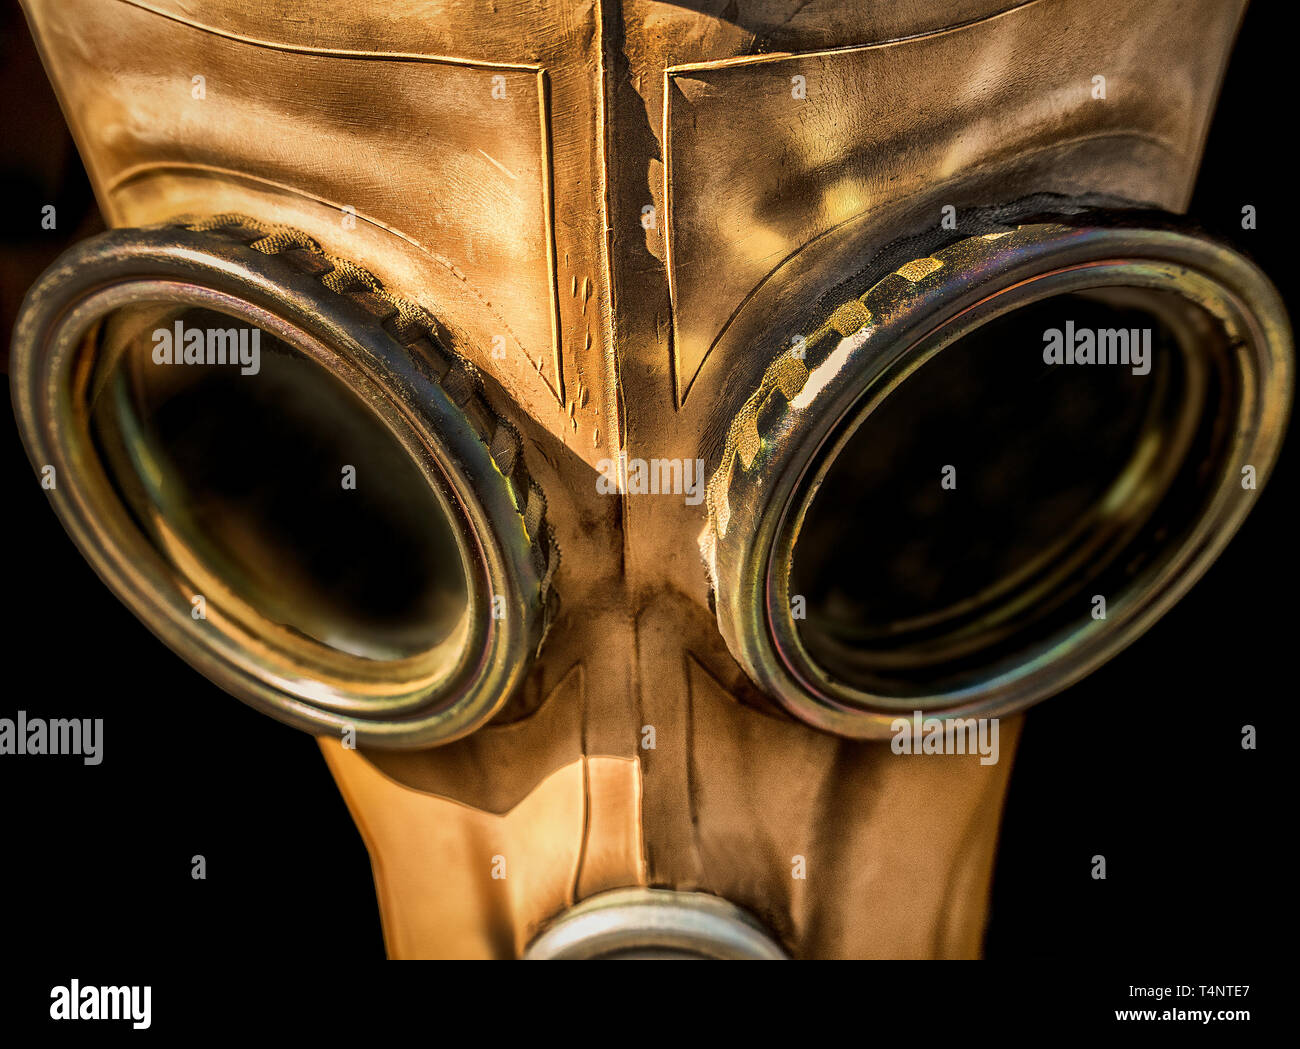 An old gas mask close-up Stock Photo